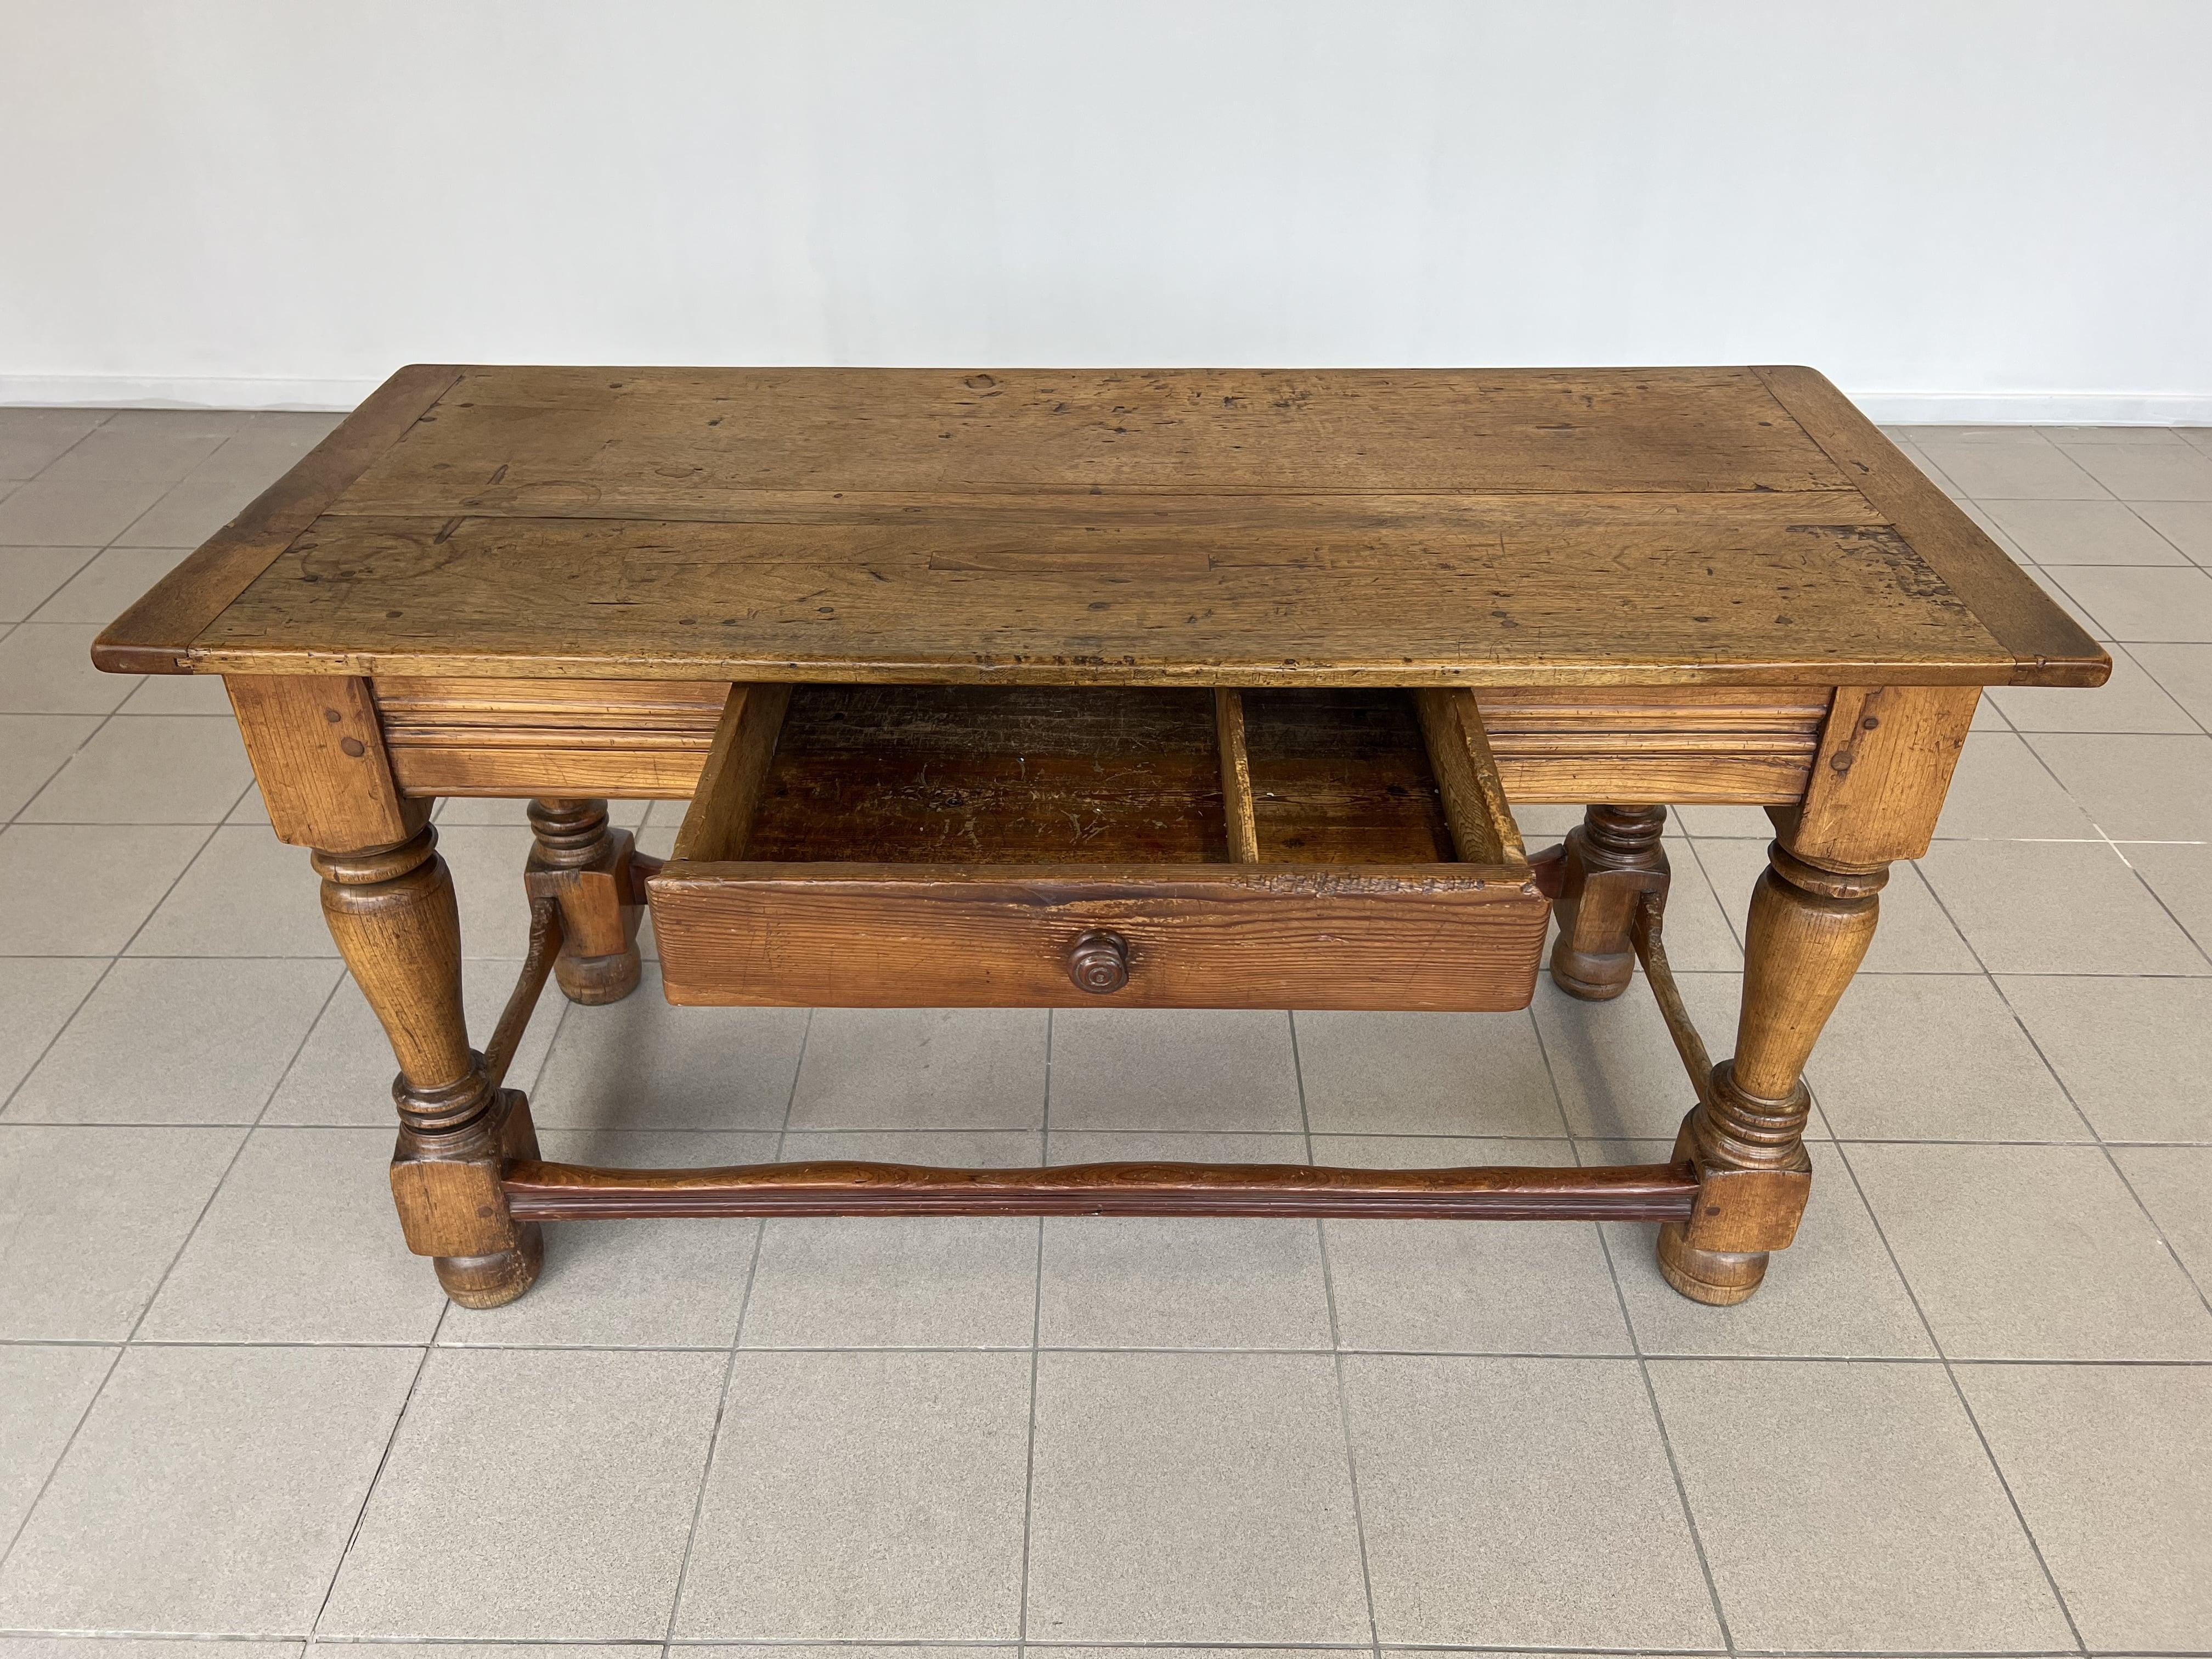 Oak Antique Swiss Alps Farmhouse Small Dining Table or Writing Desk With Drawer